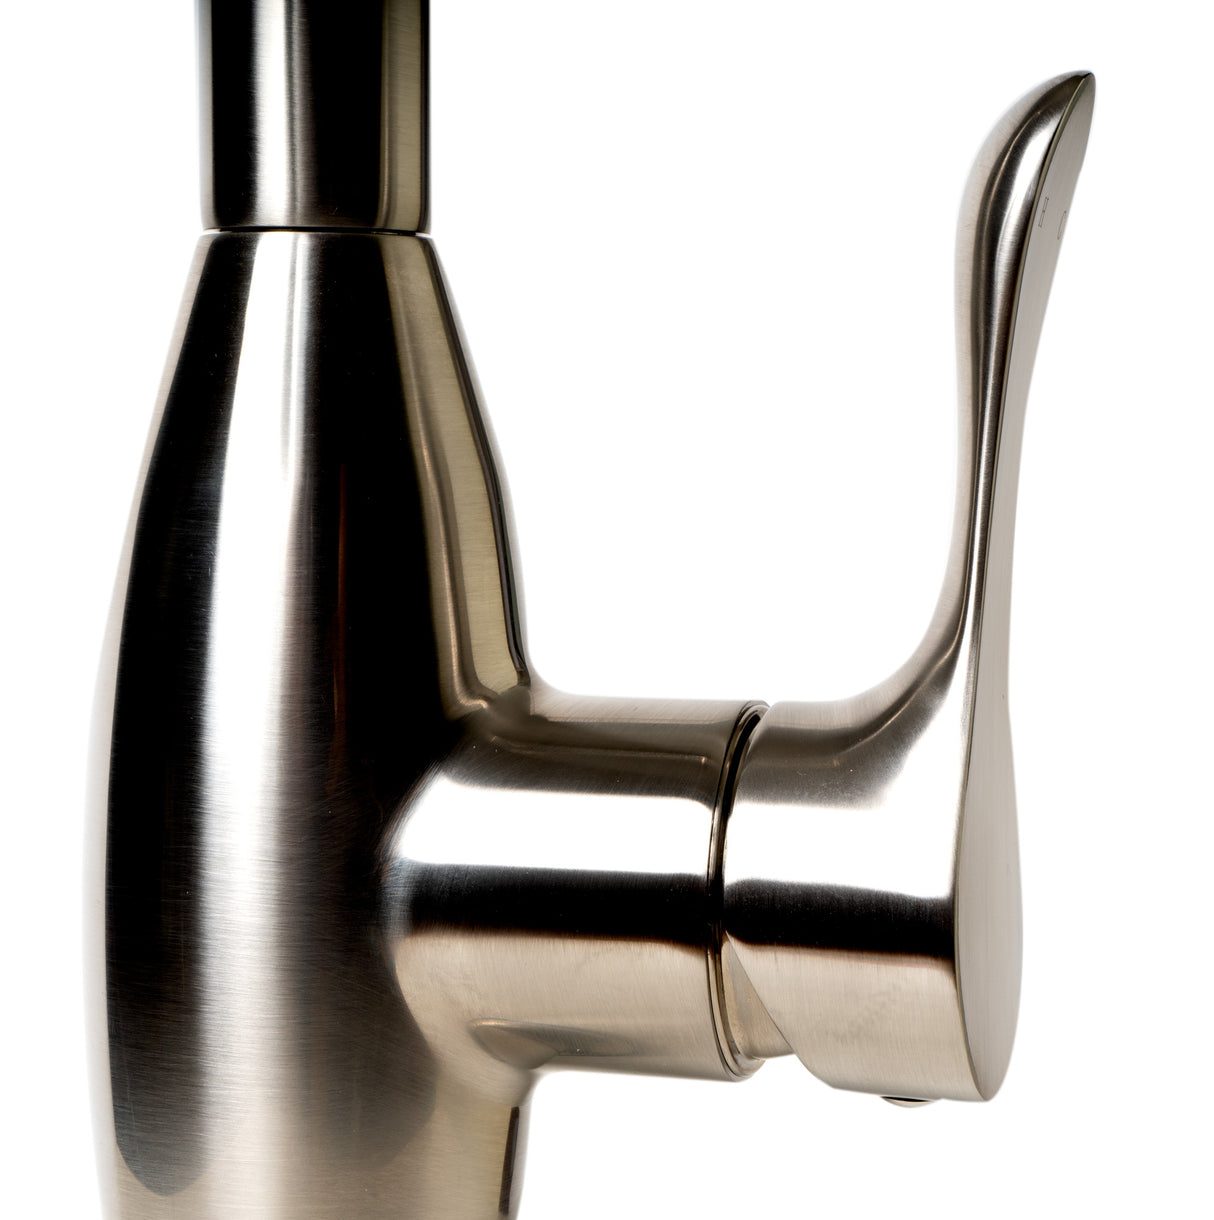 Brushed Nickel Traditional Gooseneck Pull Down Kitchen Faucet